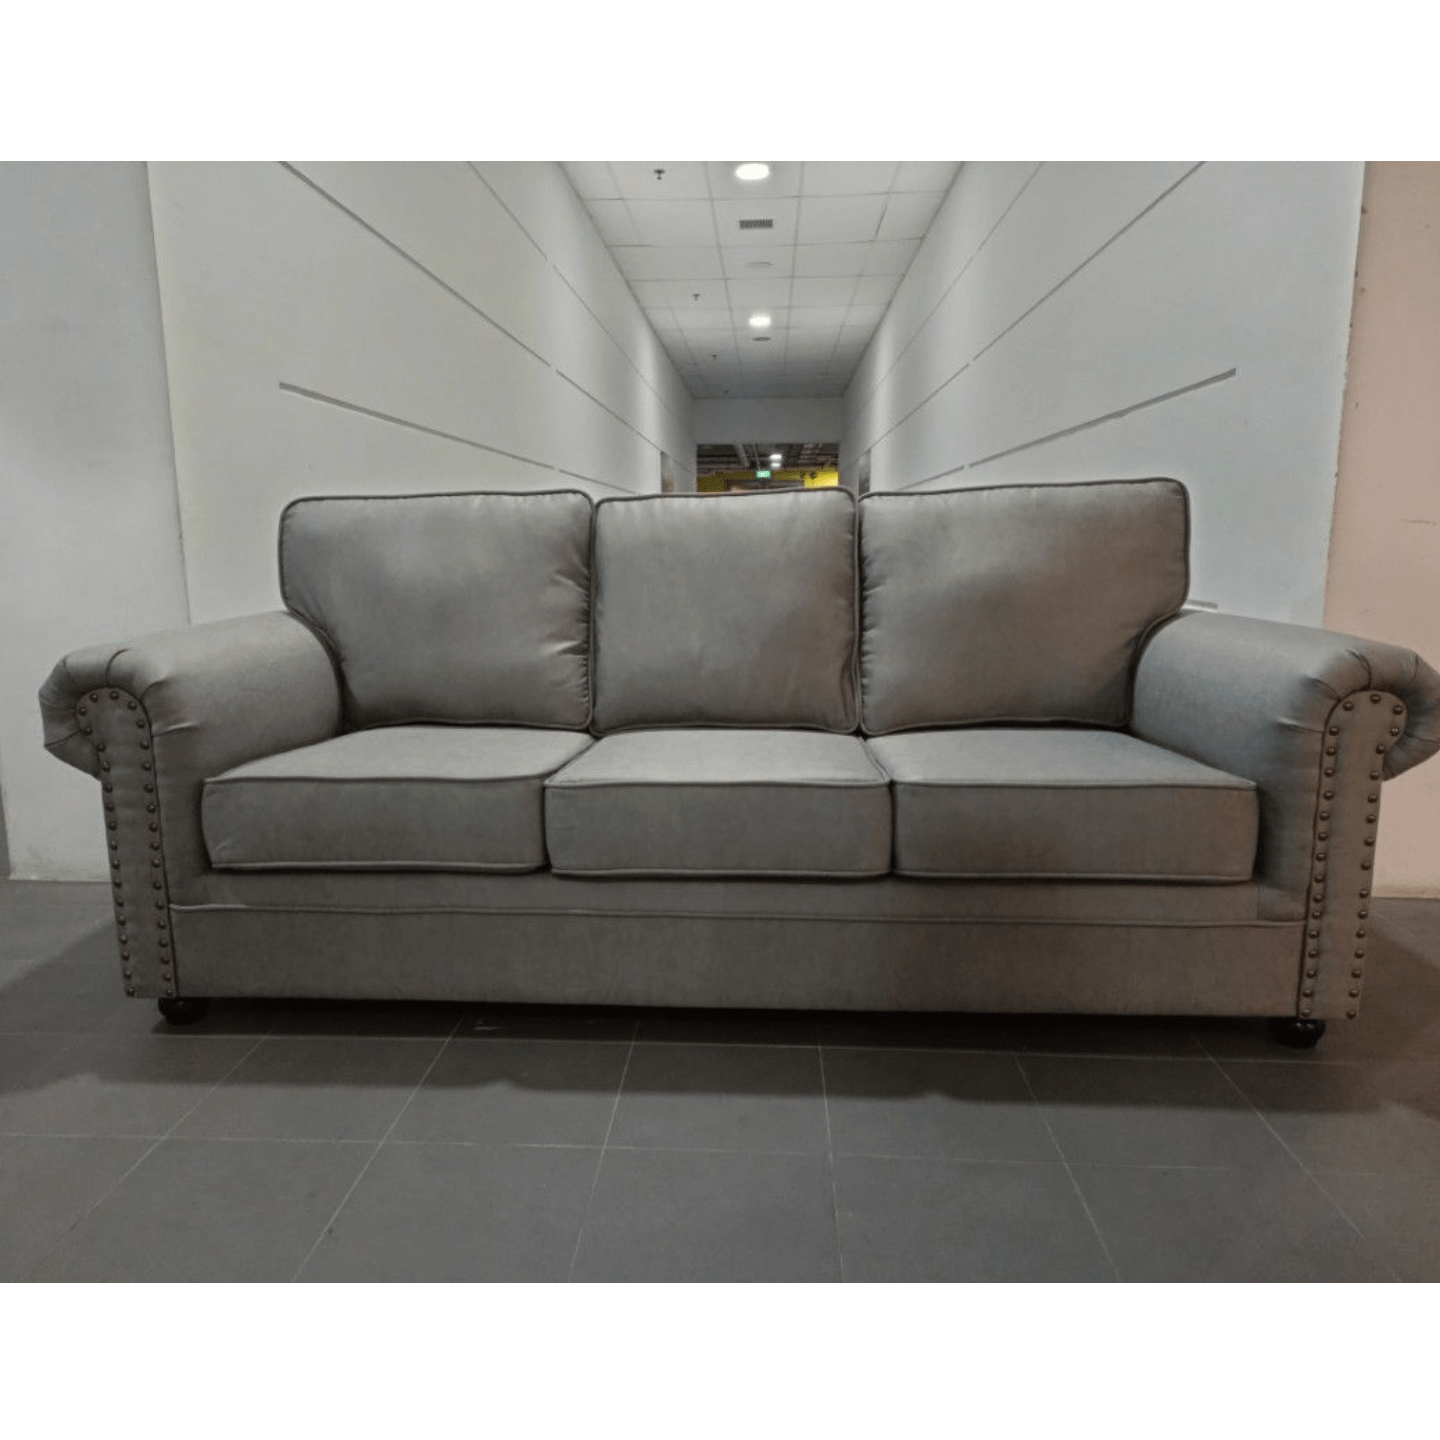 CAT FRIENDLY VALENTORA 3 Seater Chesterfield Sofa in QUARRY GREY TECH LEATHAIRE